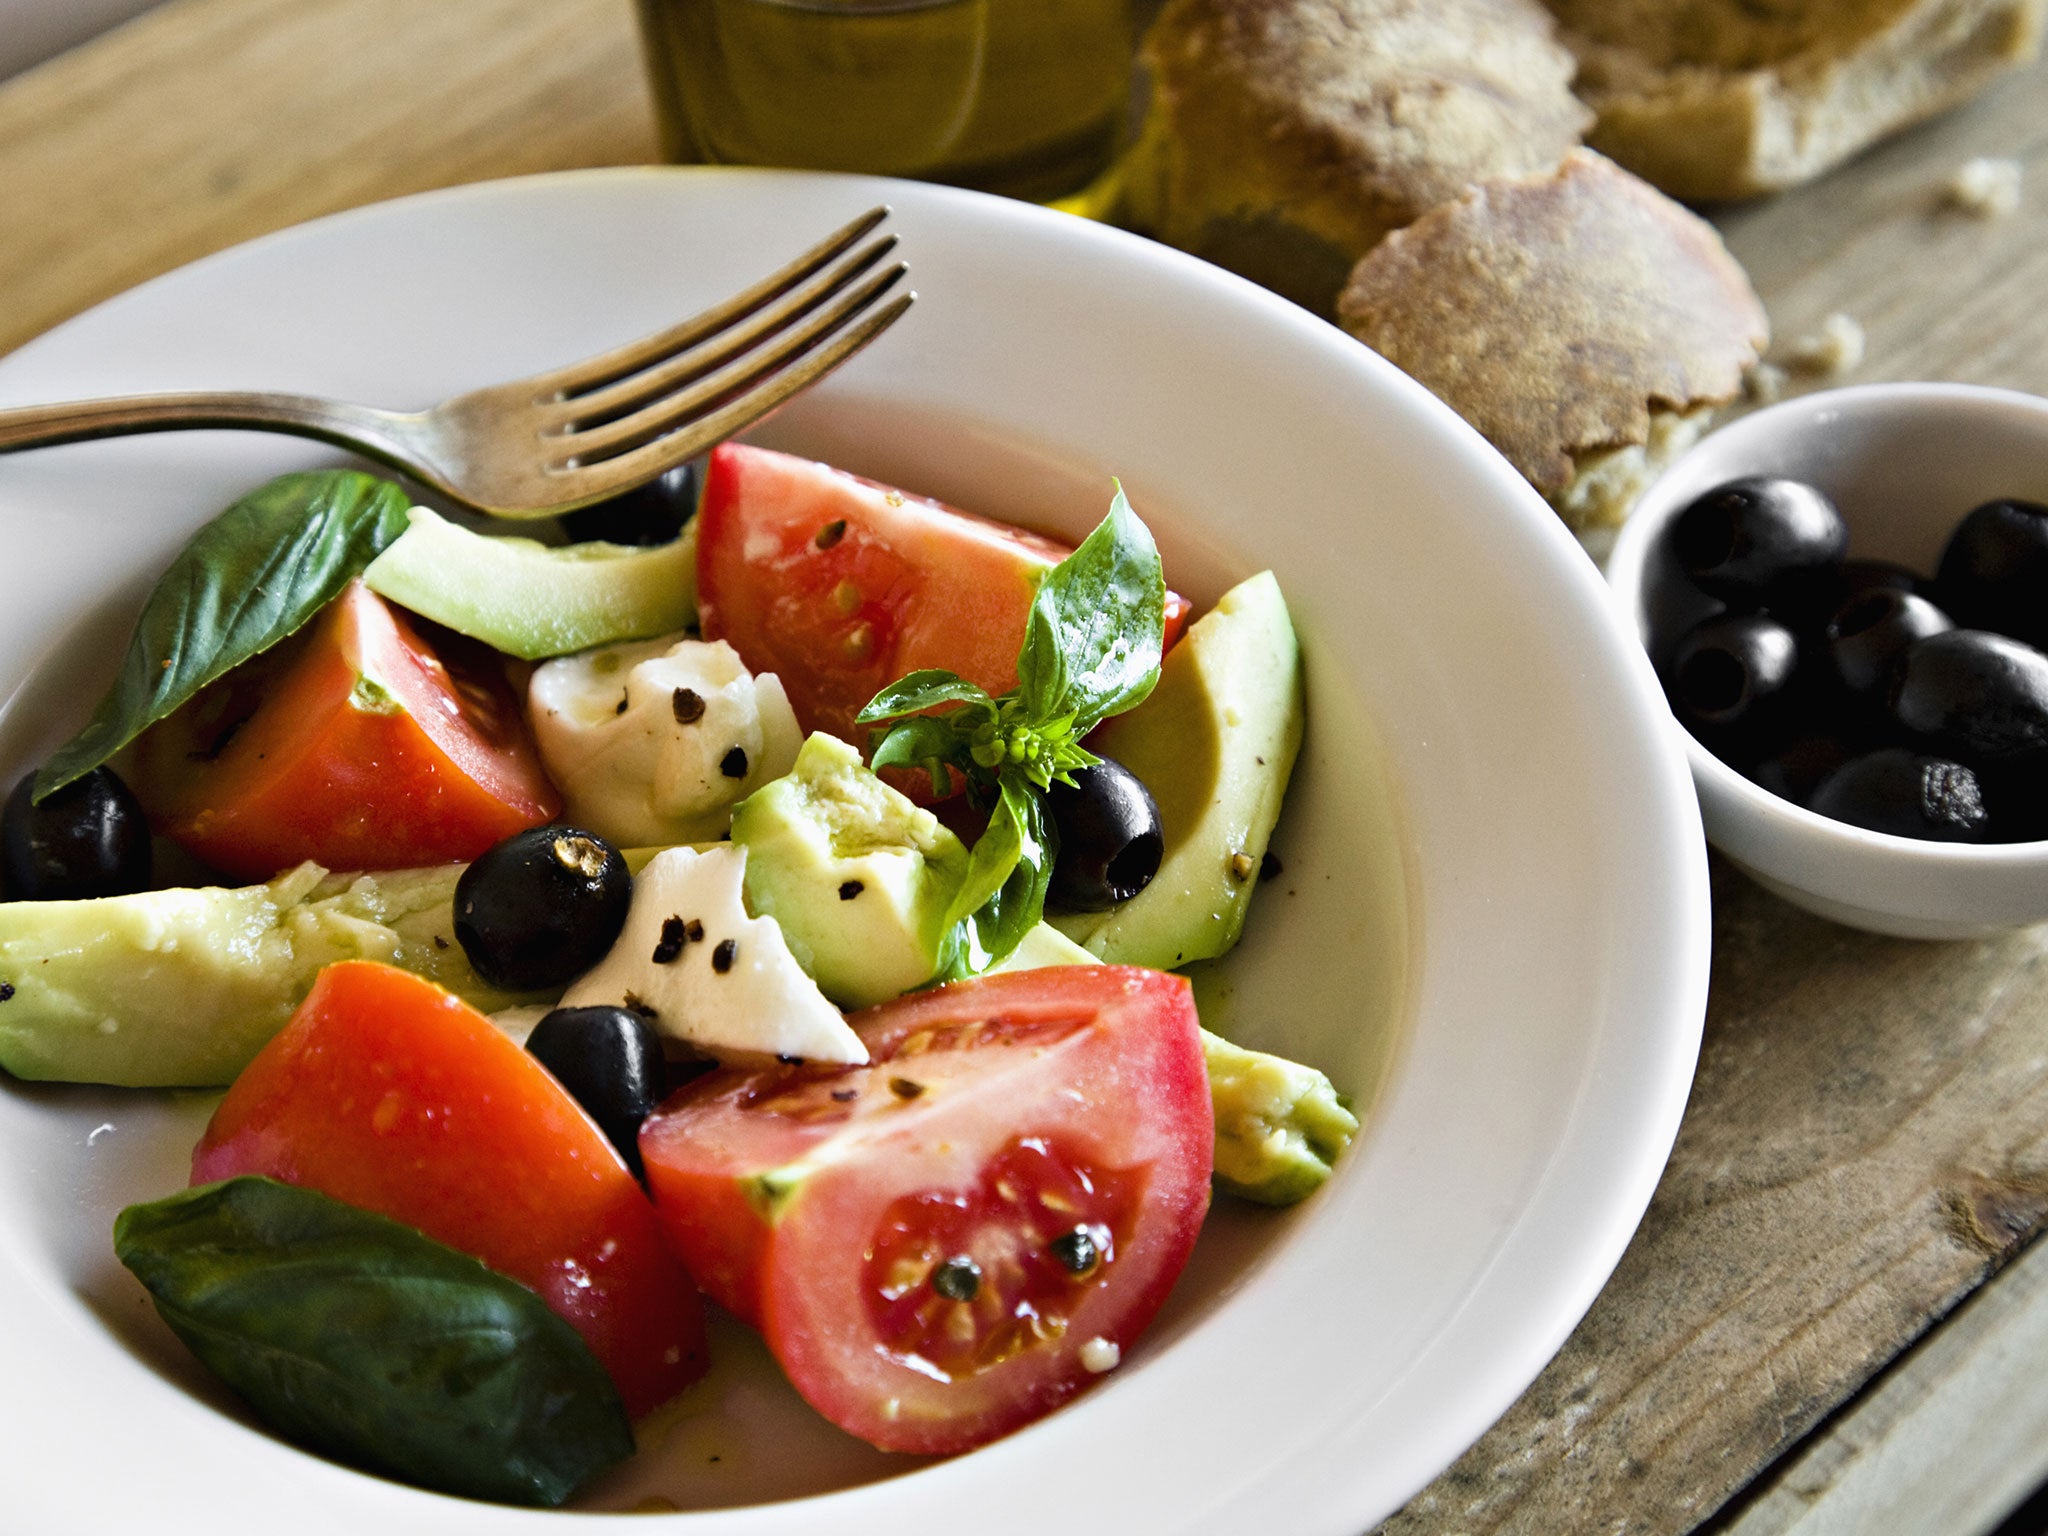 Eating a Mediterranean diet could cut your risk of heart disease by 47%